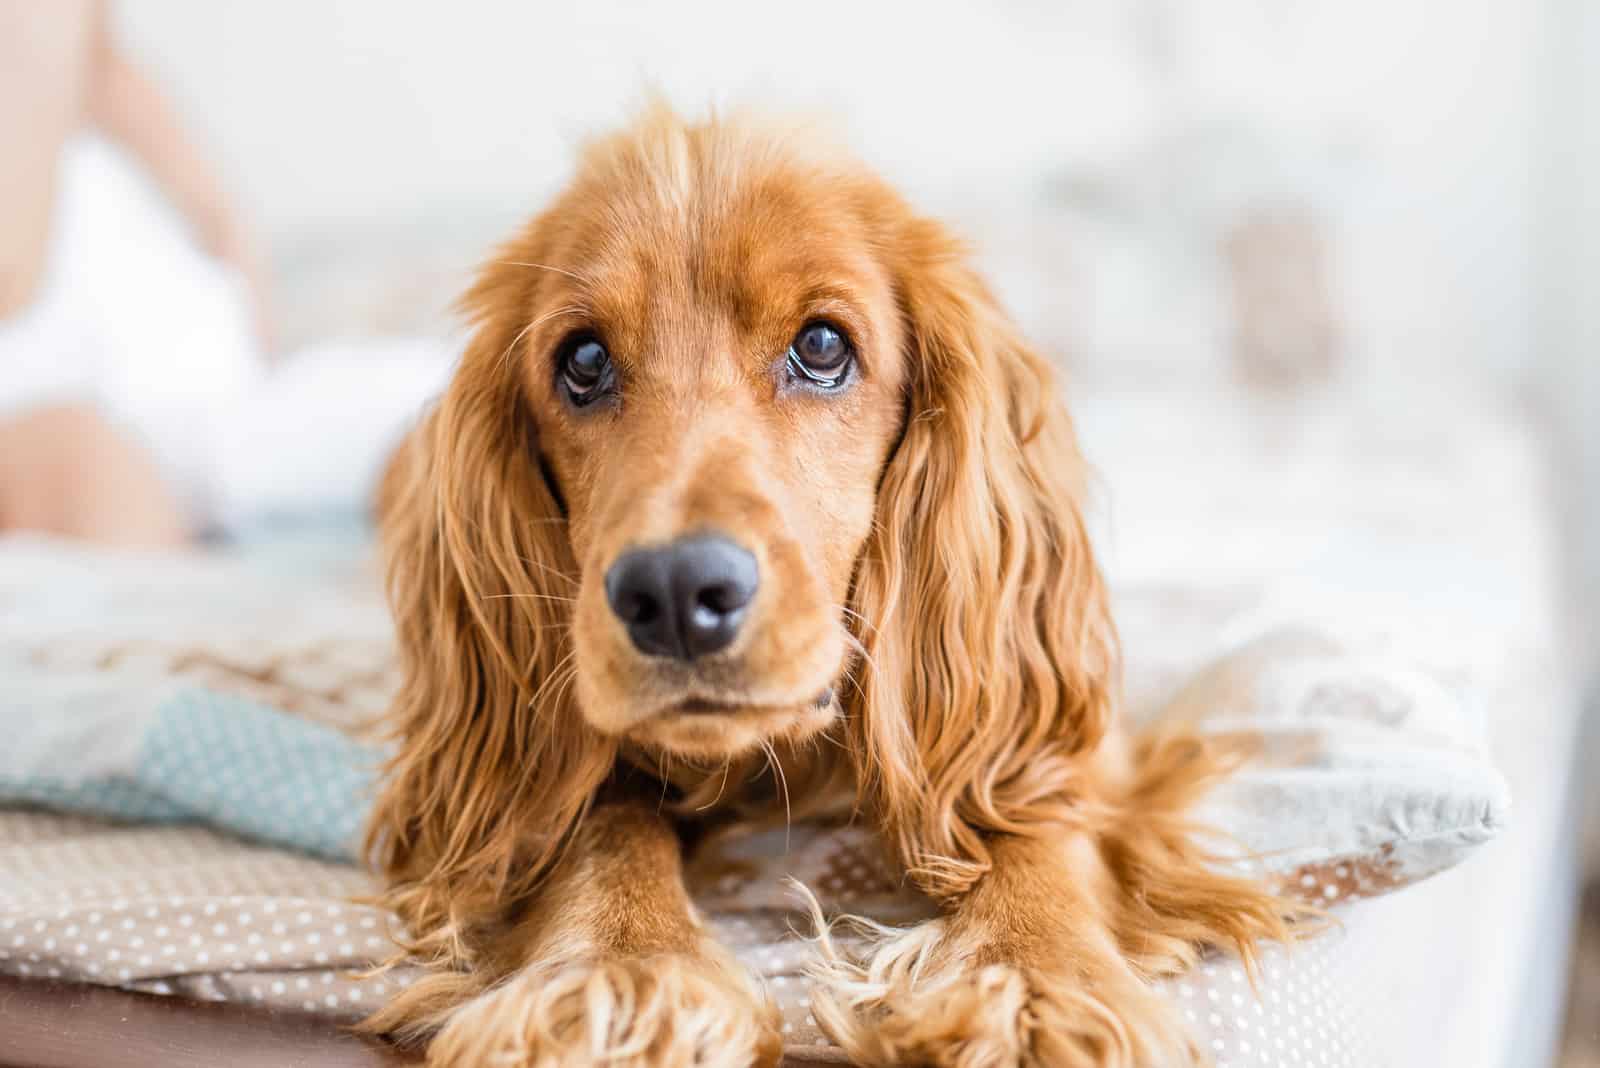 Cocker Spaniel lying on bed looking at camera